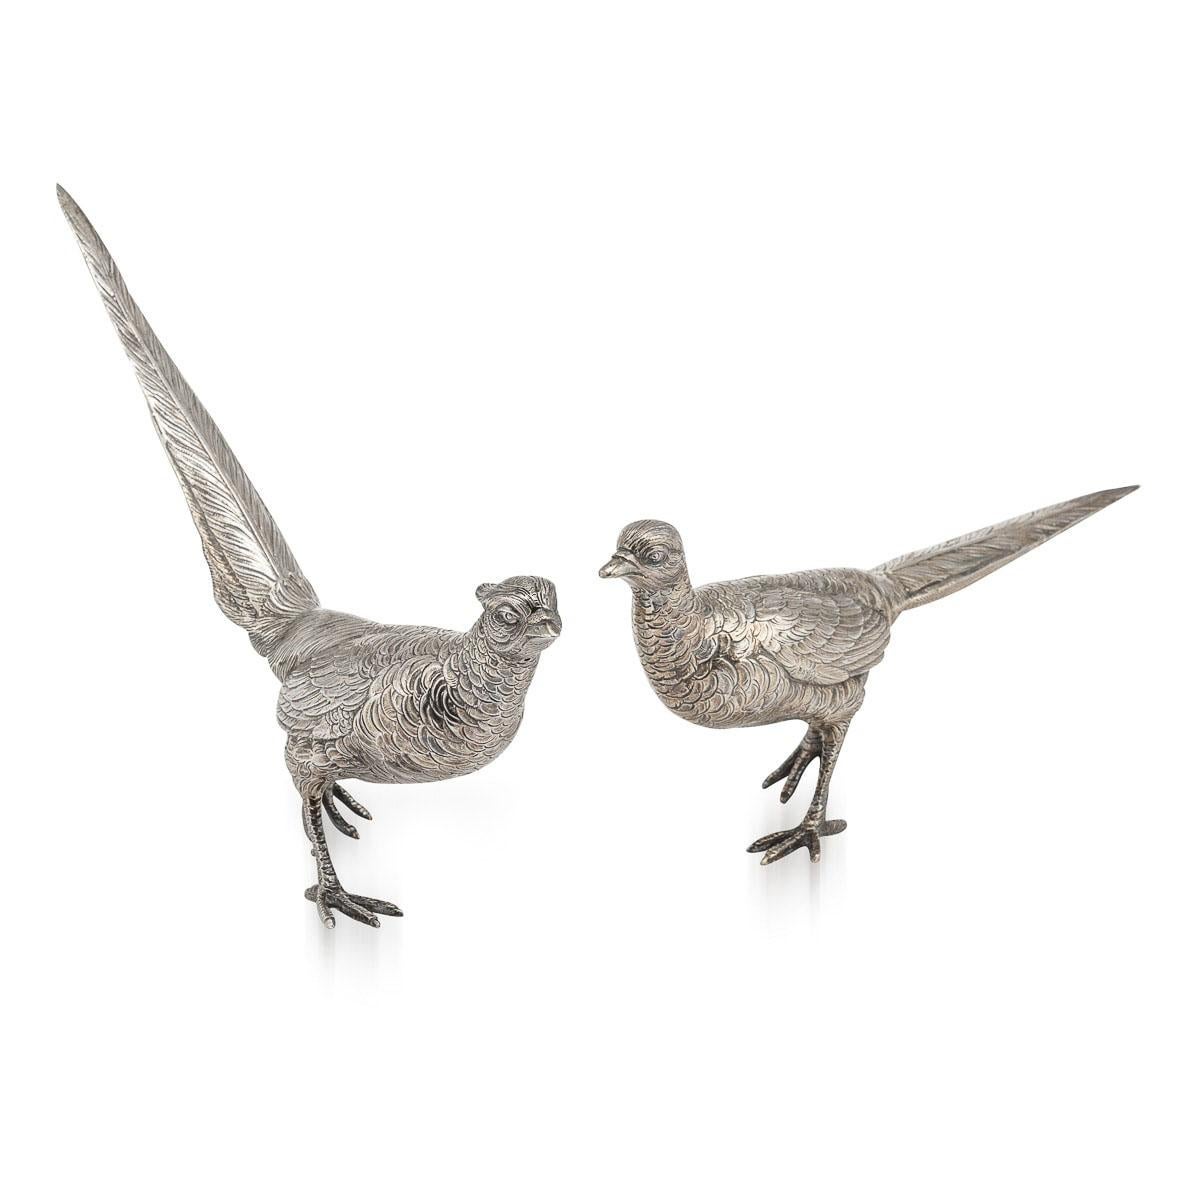 Mid 20th Century solid silver pair of pheasants, very ornamental and well refined. Each statue is naturalistically modelled as a standing bird, perfect to use as a table ornament. The male pheasant is slightly larger than the female. A perfect